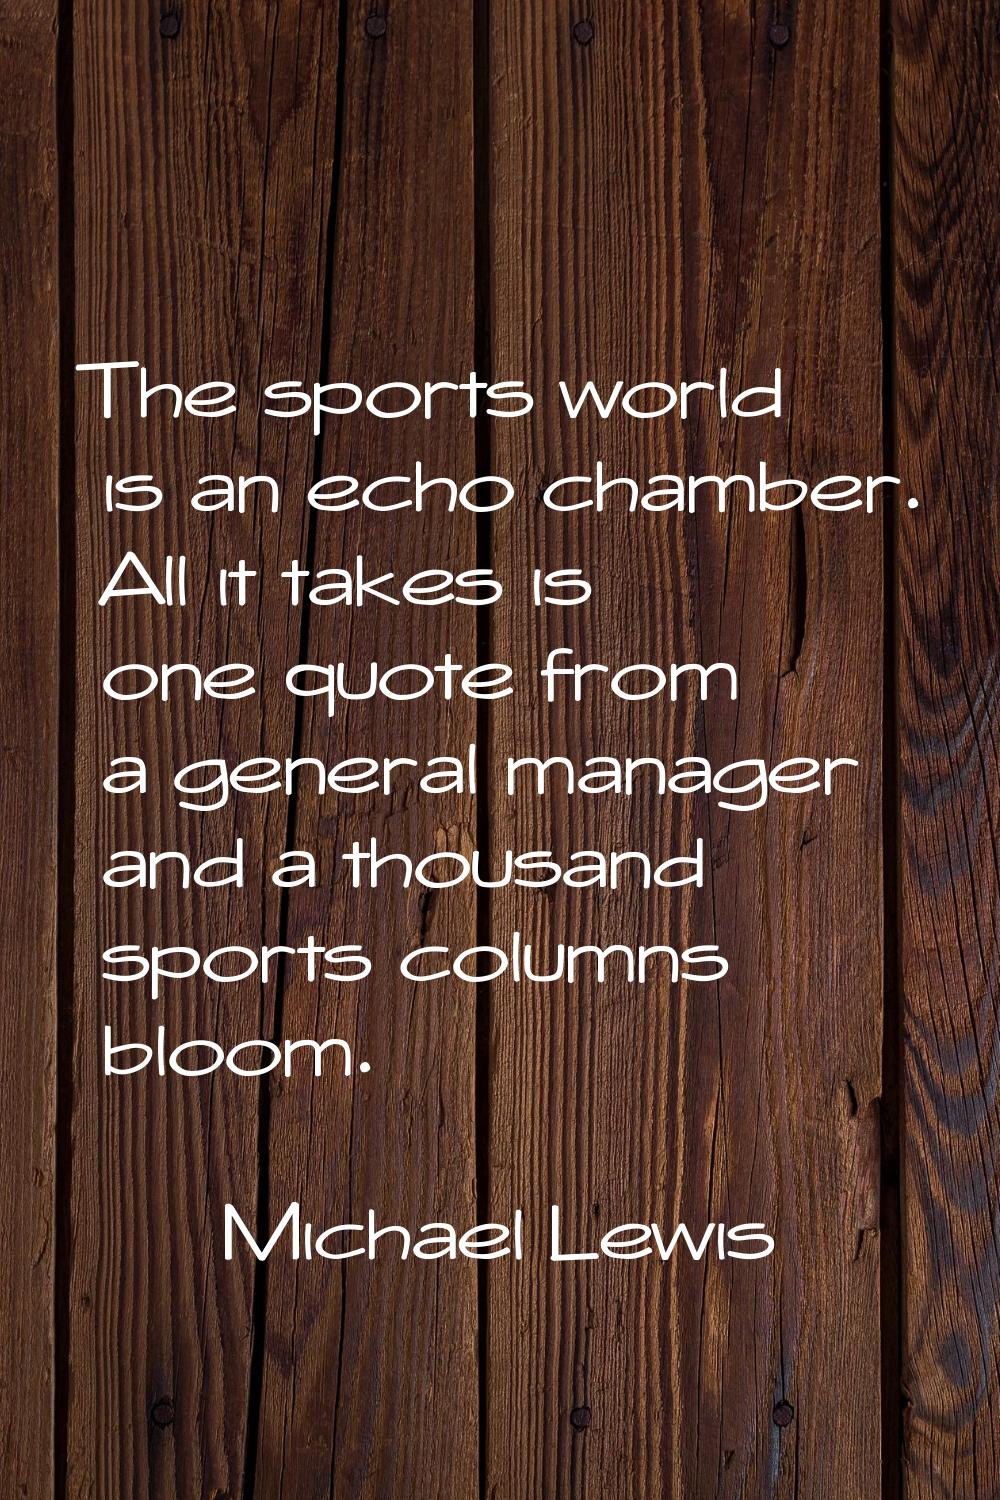 The sports world is an echo chamber. All it takes is one quote from a general manager and a thousan